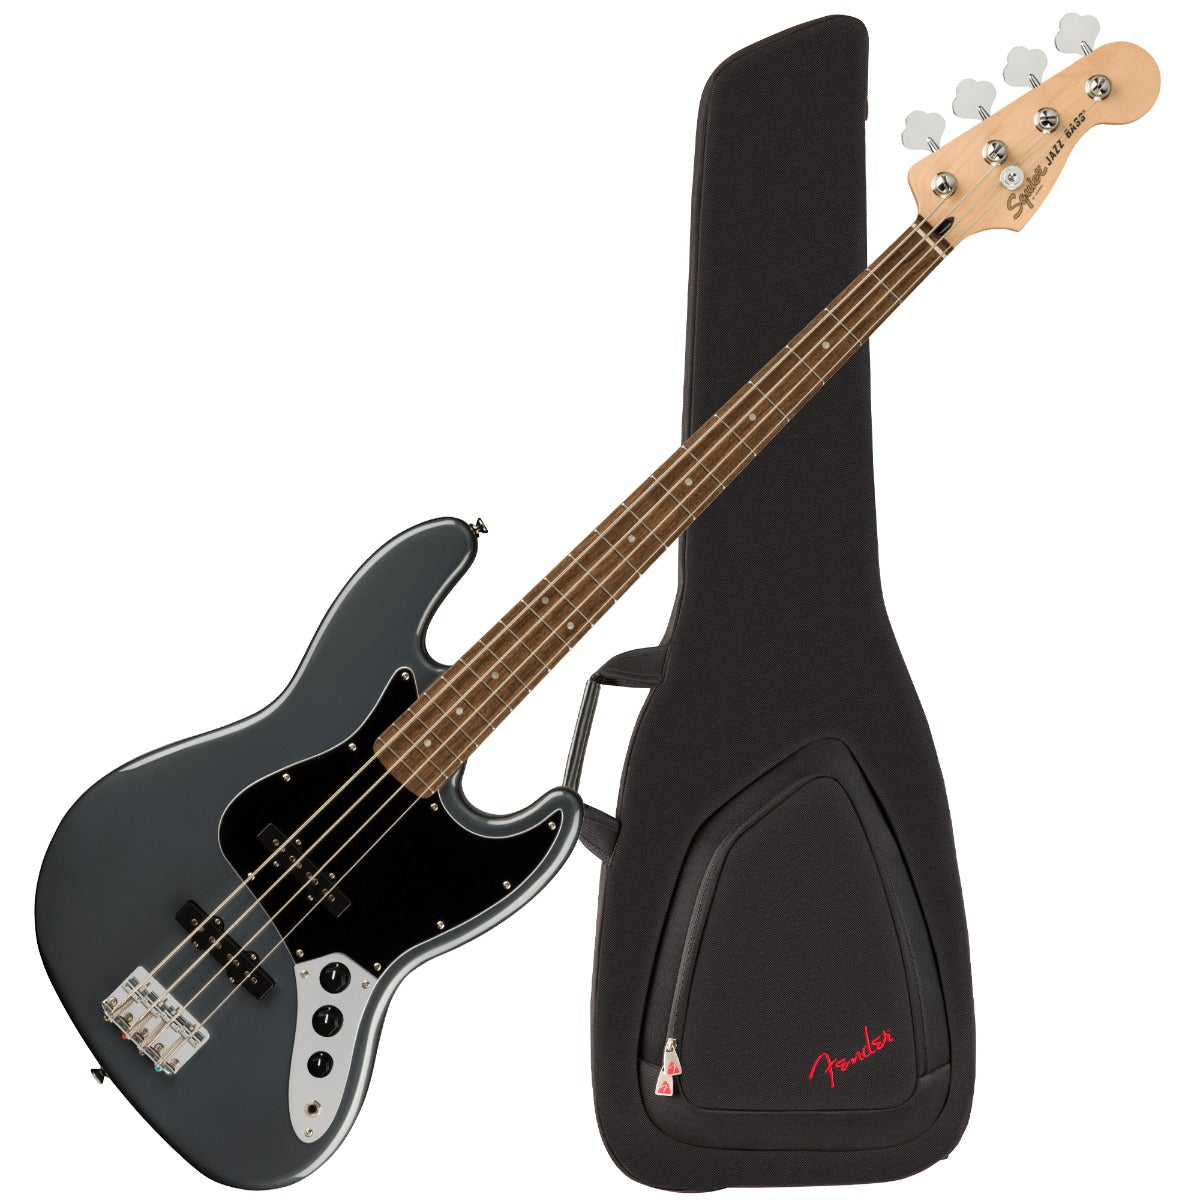 Bundle collage of the components for the Squier Affinity Jazz Bass - Laurel, Charcoal Frost Metallic PERFORMER PAK